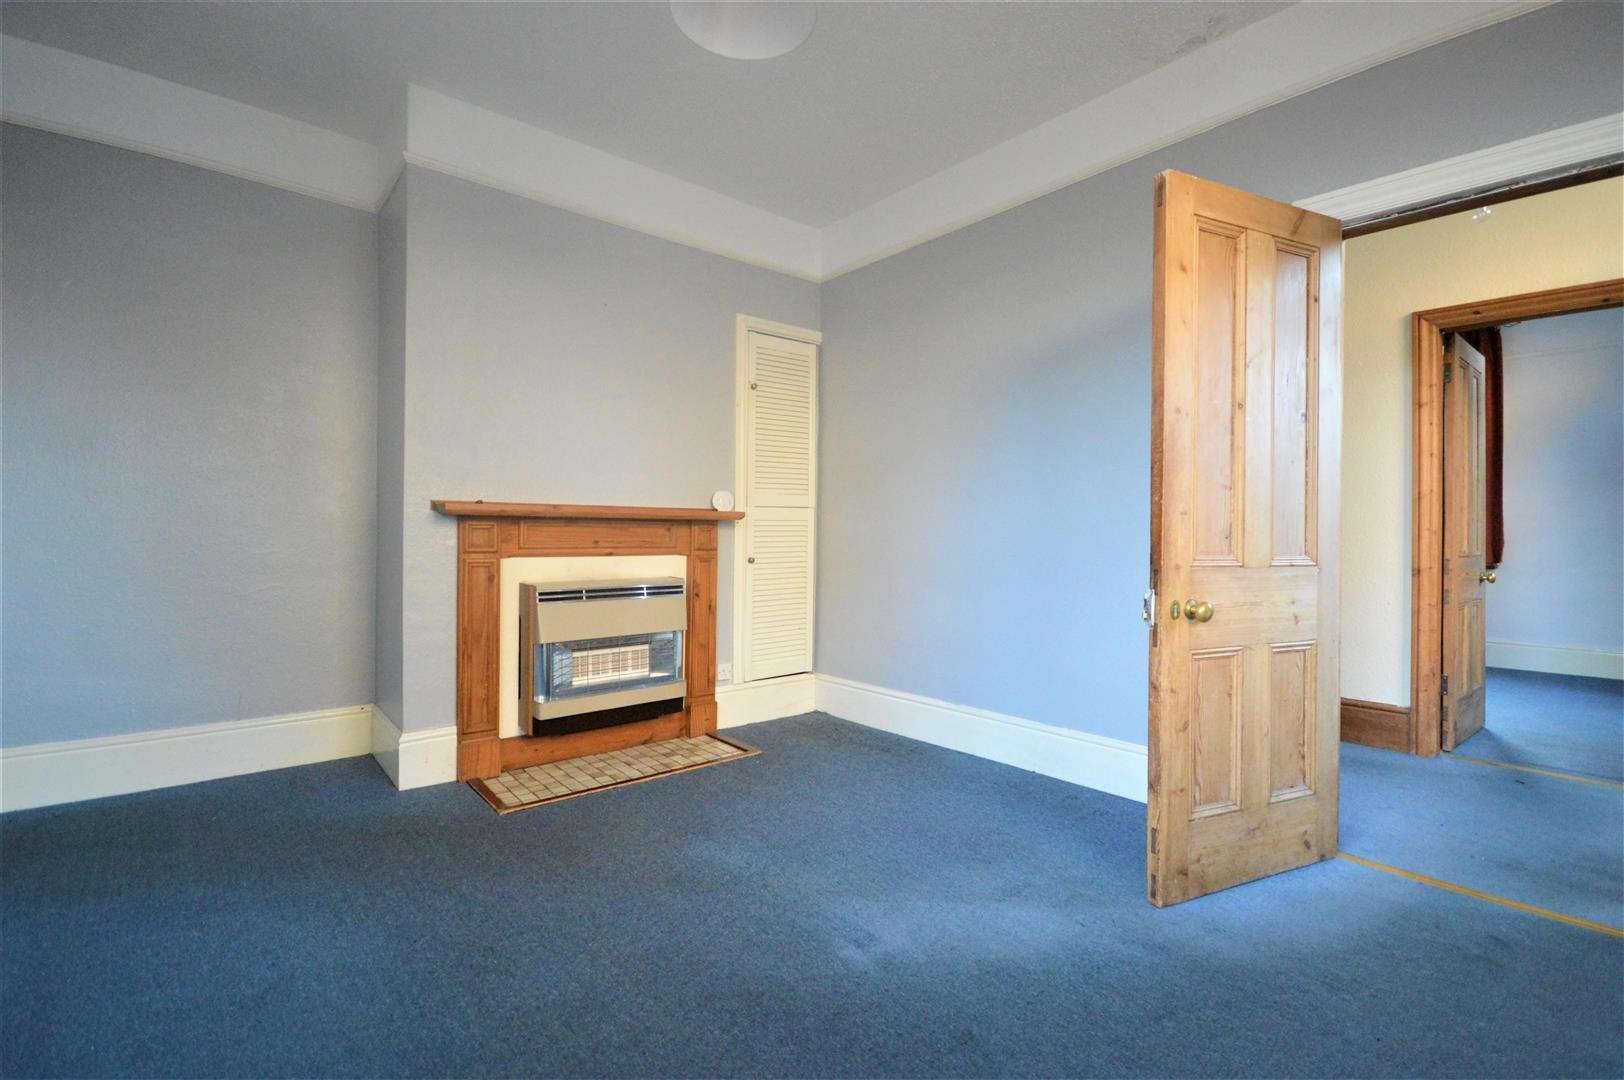 3 bed end of terrace for sale in Leominster 3